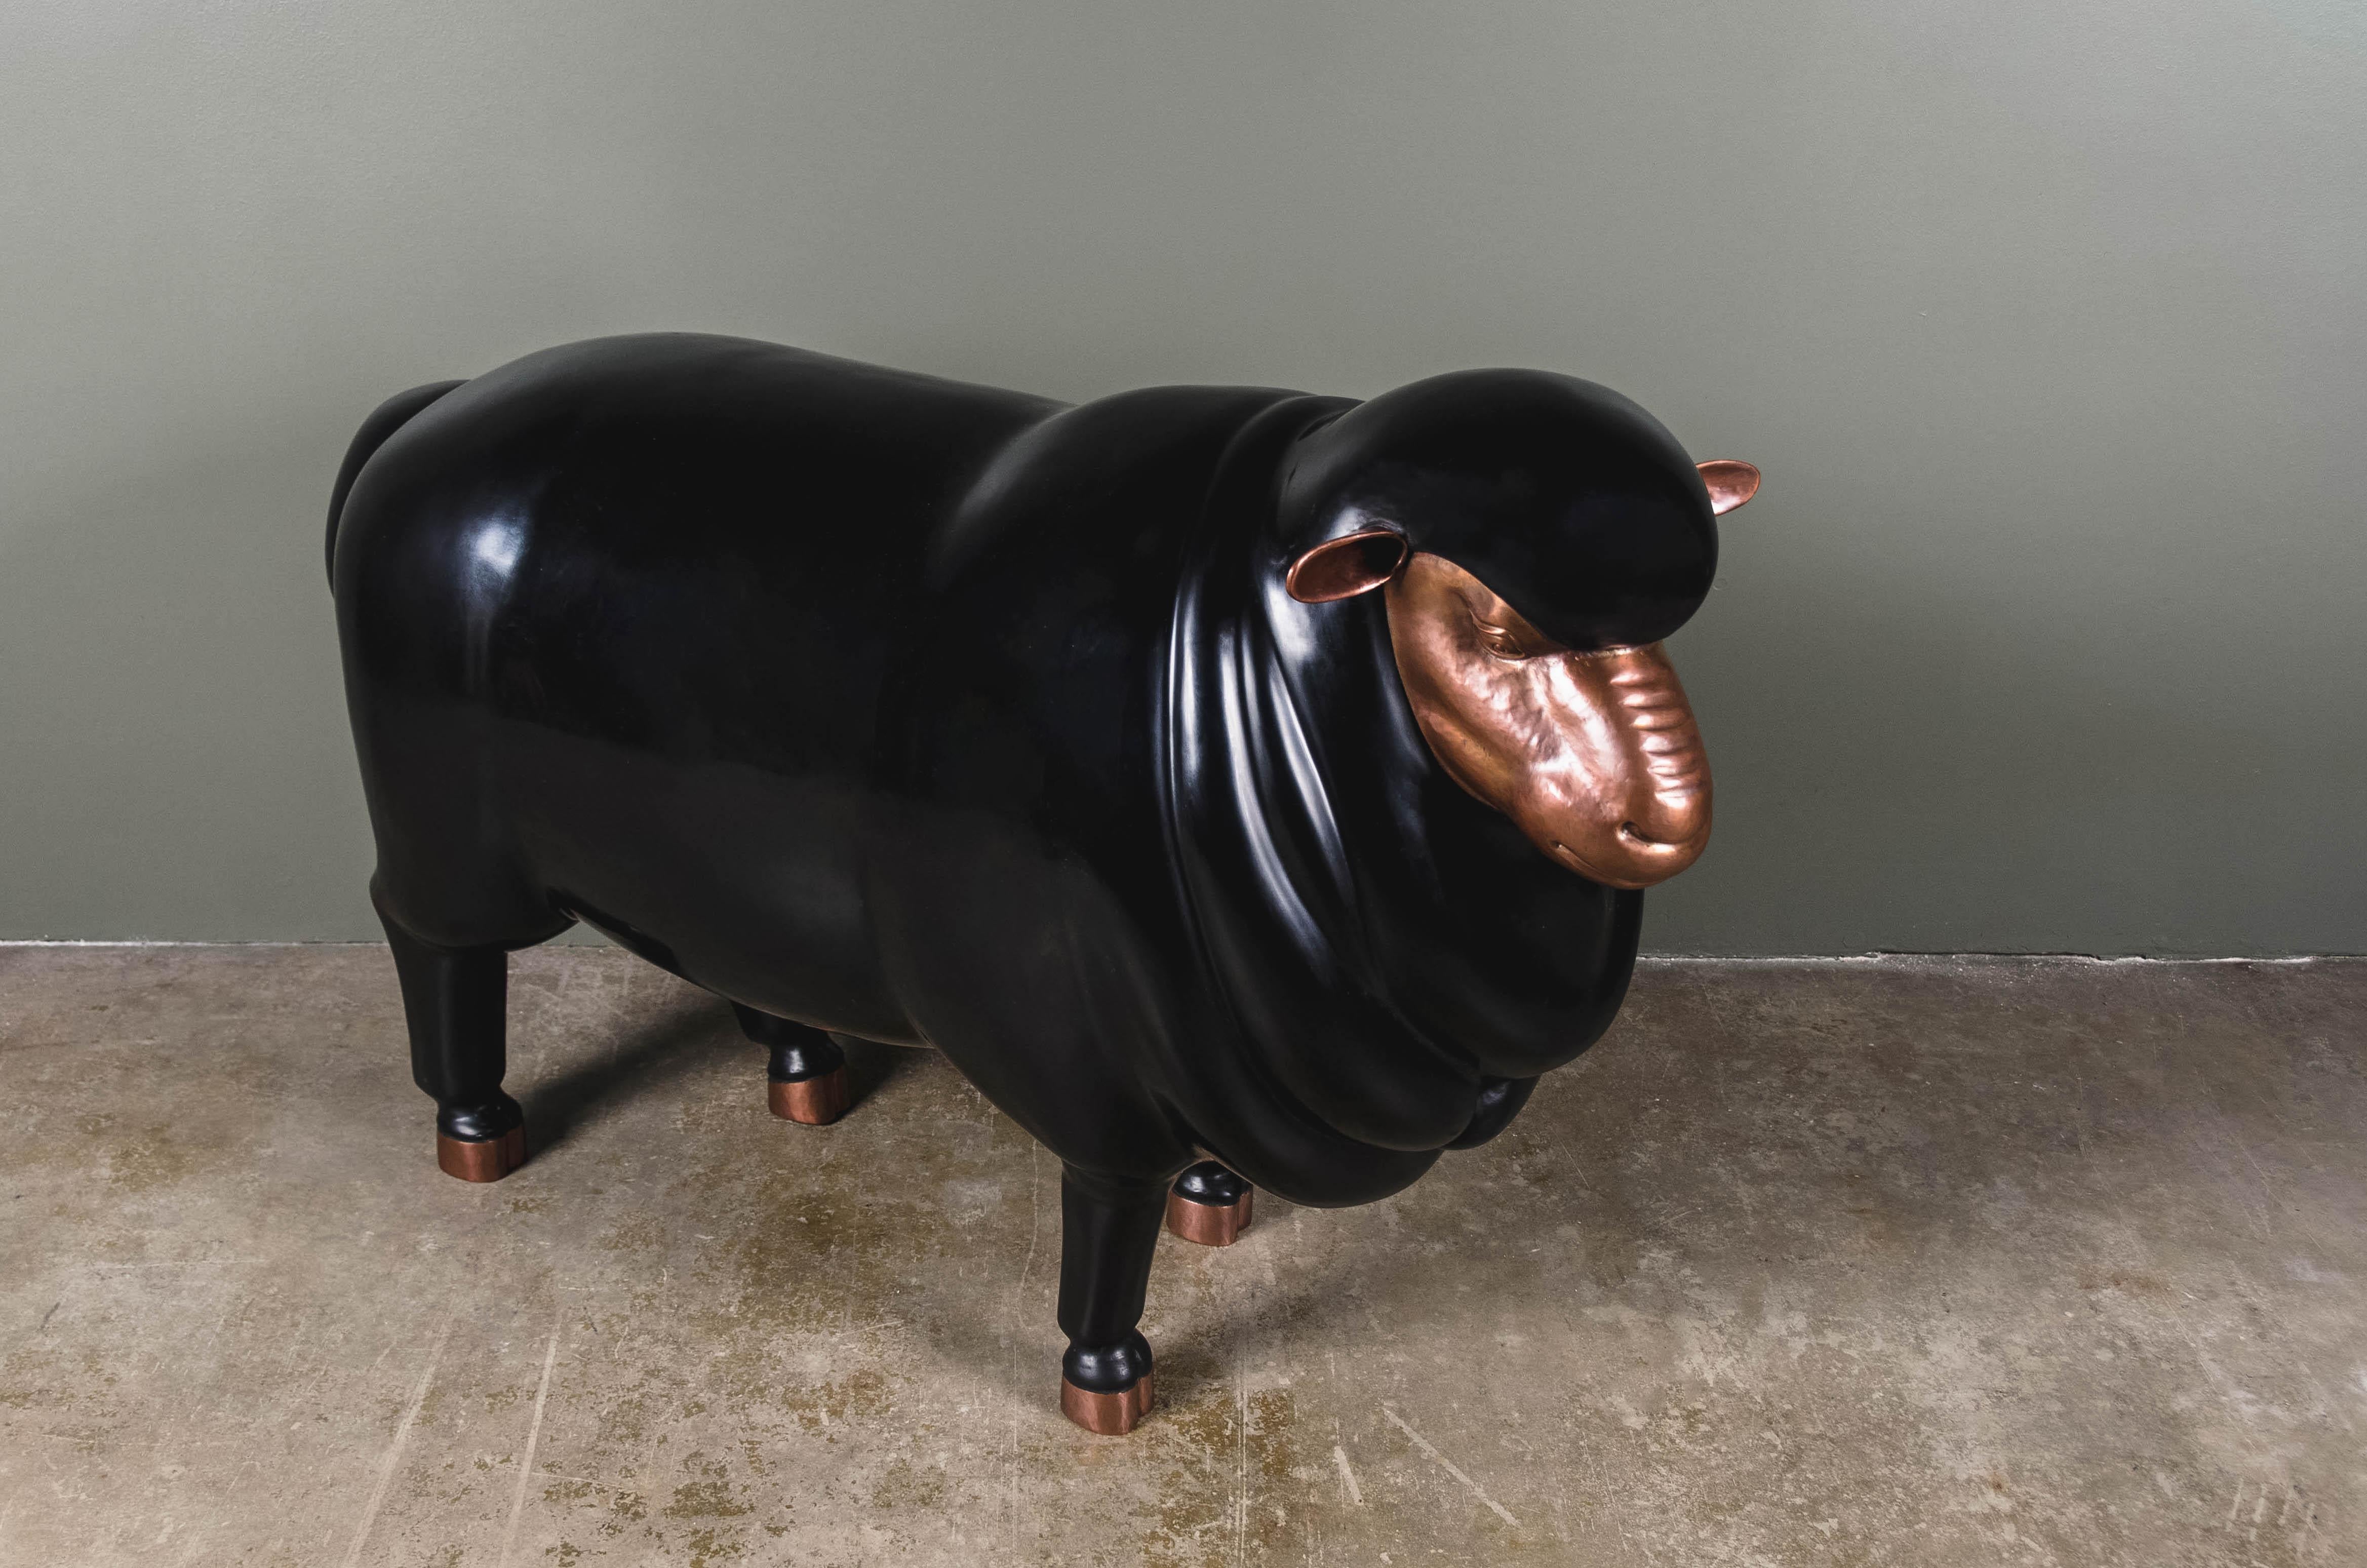 Sheep sculpture (Male)
Black lacquer
Antique copper
Hand repoussé
Limited edition
Repoussé is the traditional art of hand-hammering decorative relief onto sheet metal. This technique involves using a hammer and various shaping tools. The